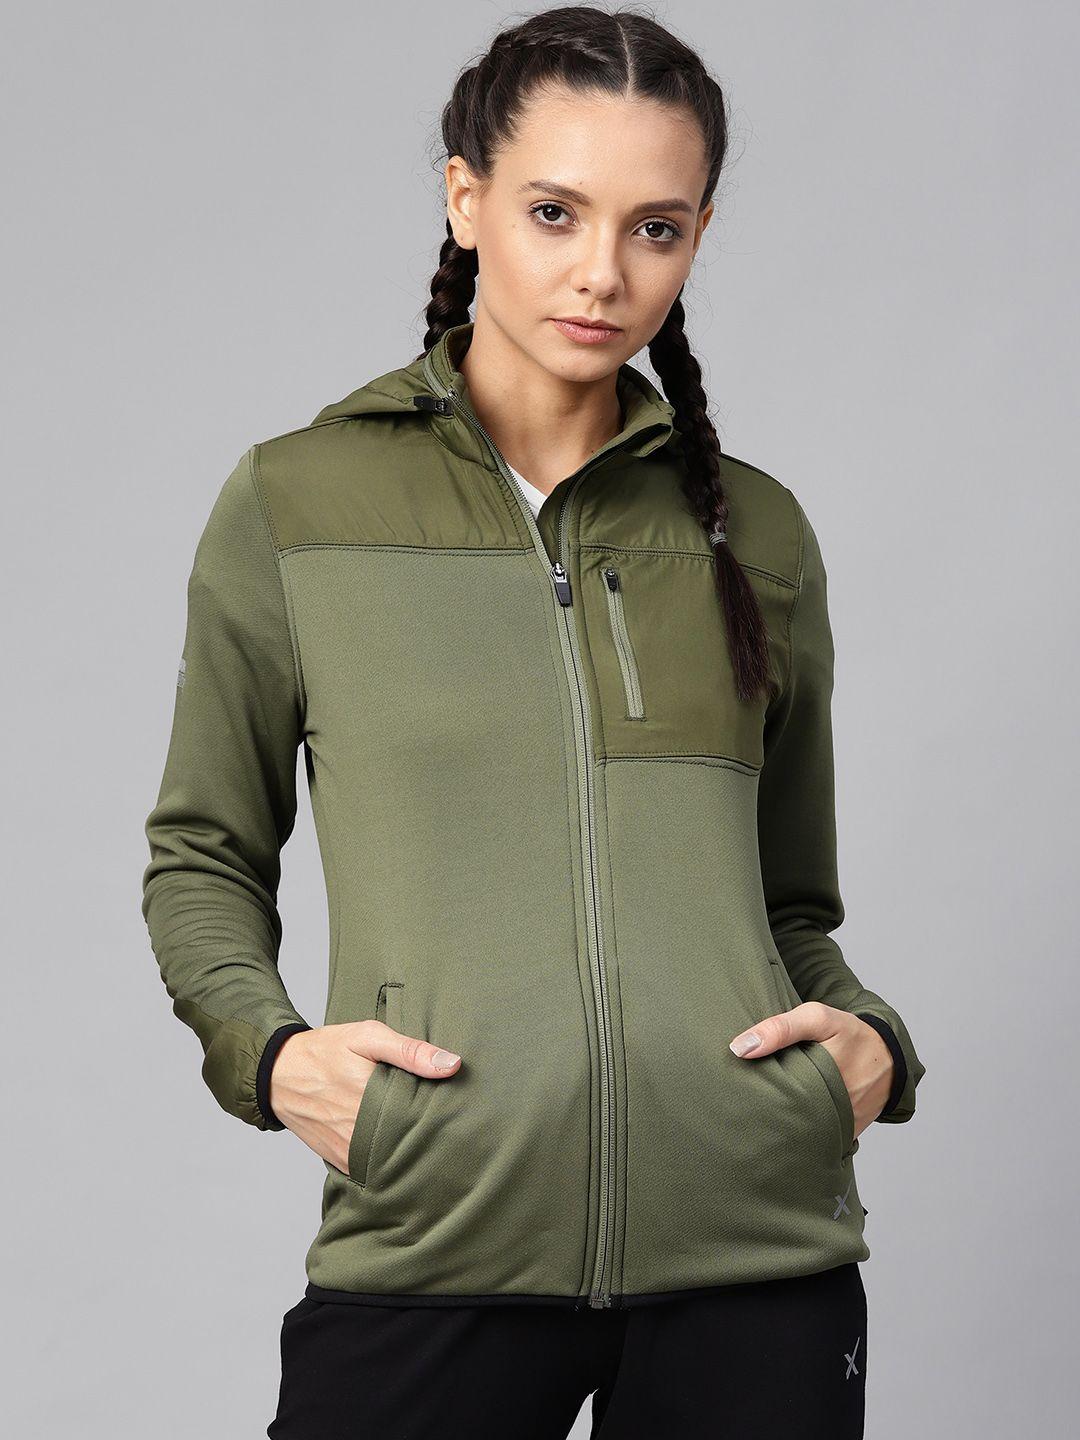 hrx by hrithik roshan women winter moss solid rapid-dry antimicrobial outdoor jacket